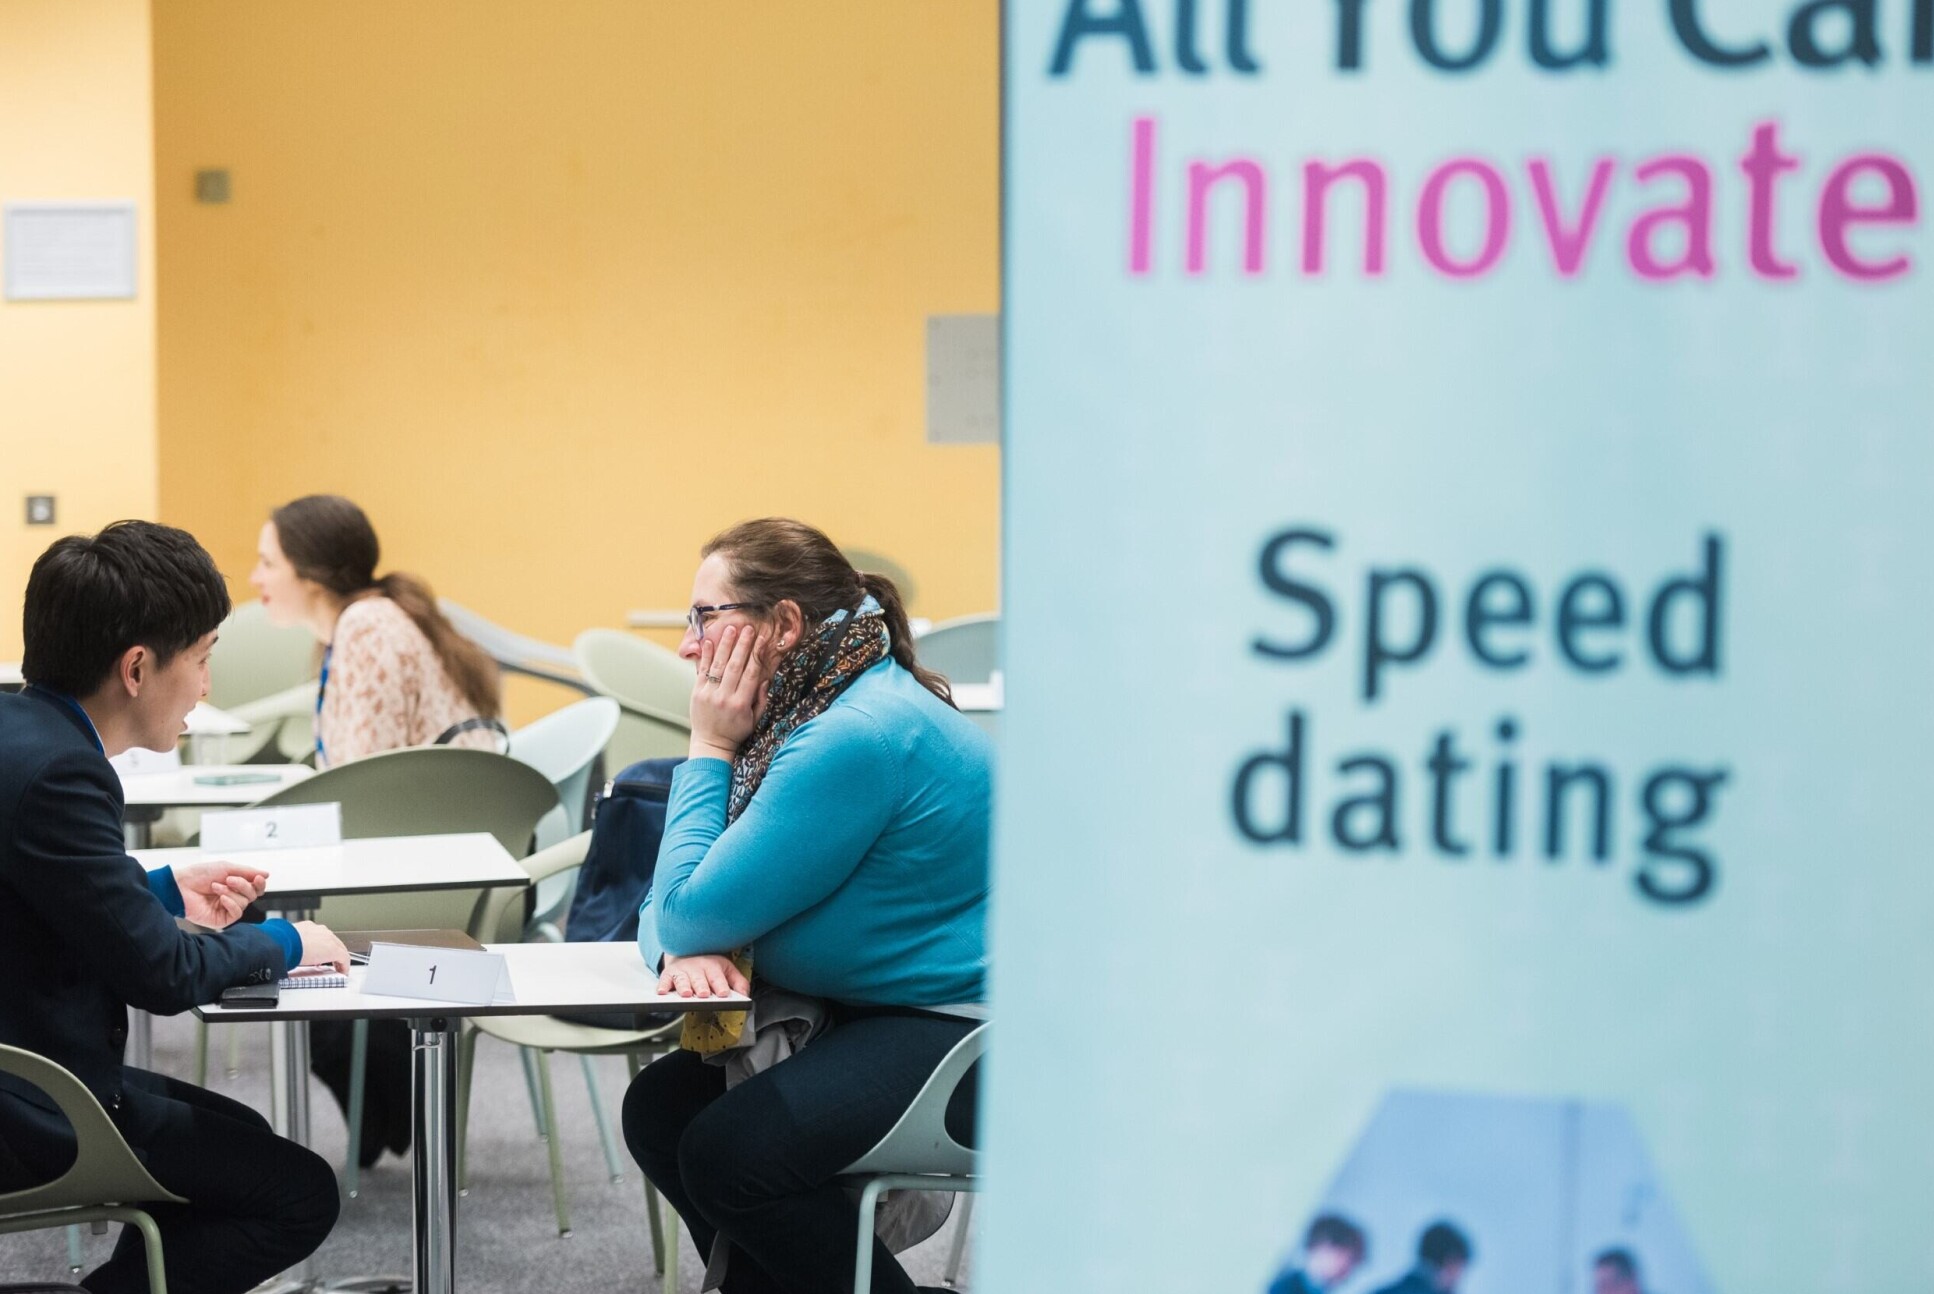 All You Can Innovate corporate speed dating session